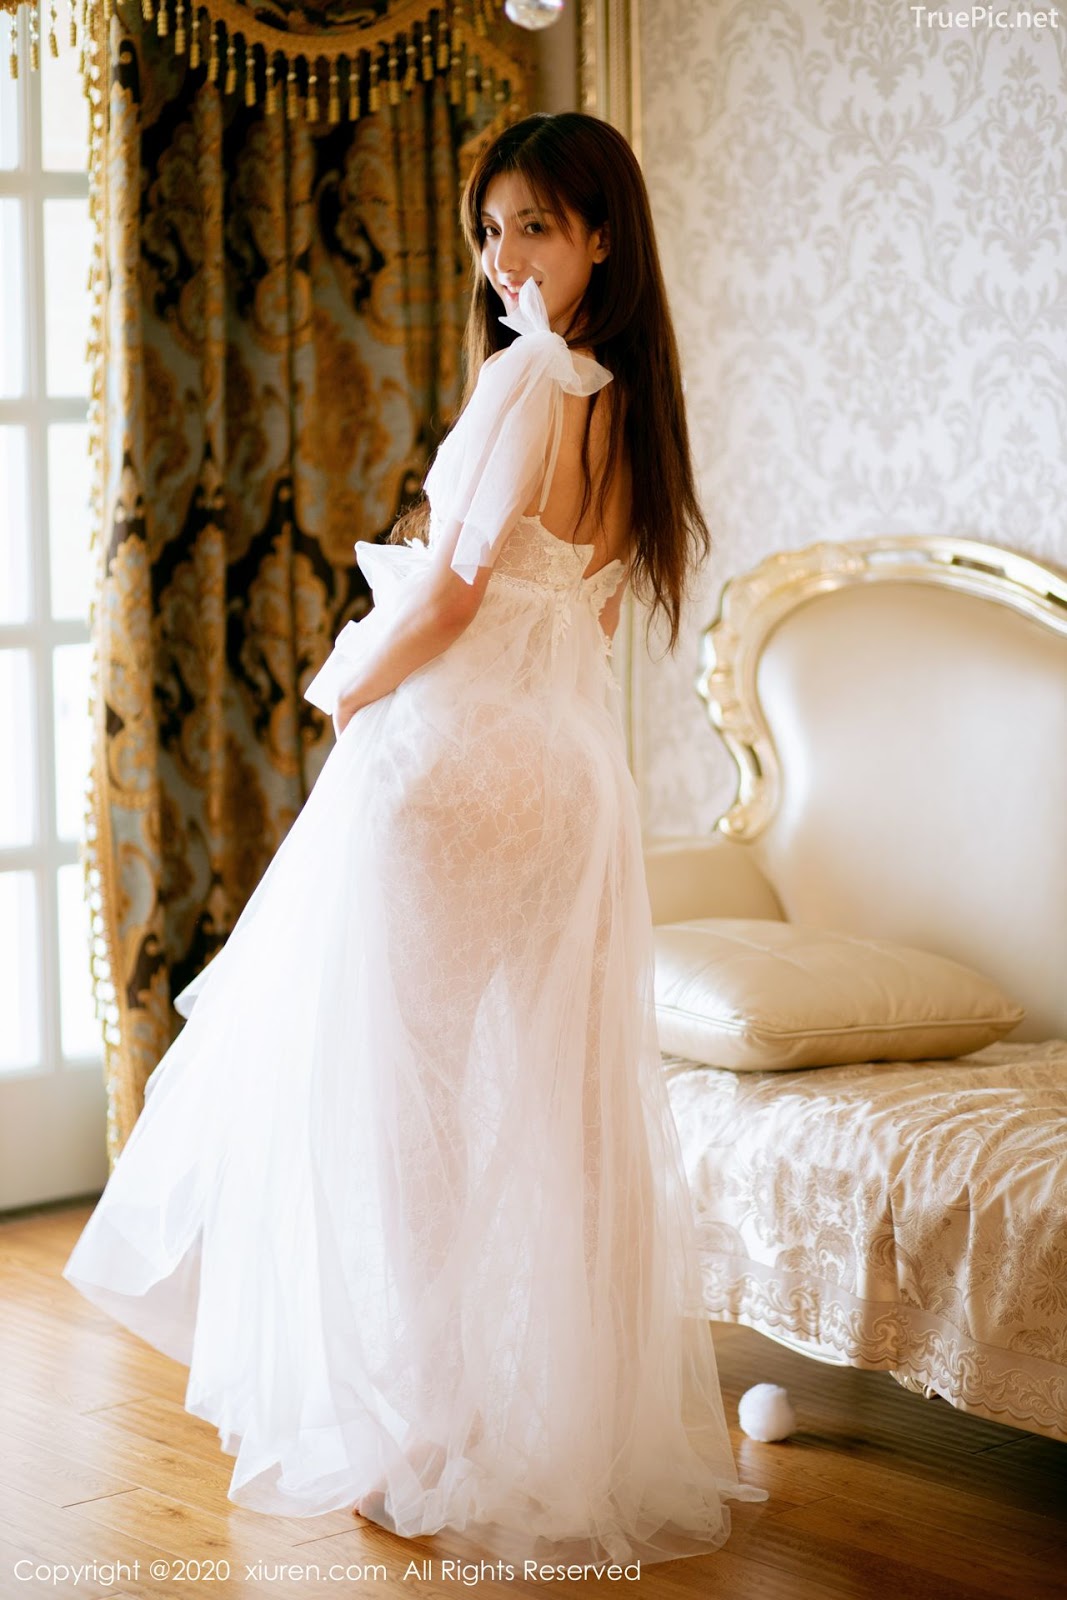 XIUREN No.1914 - Chinese model 林文文Yooki so Sexy with Transparent White Lace Dress - Picture 47